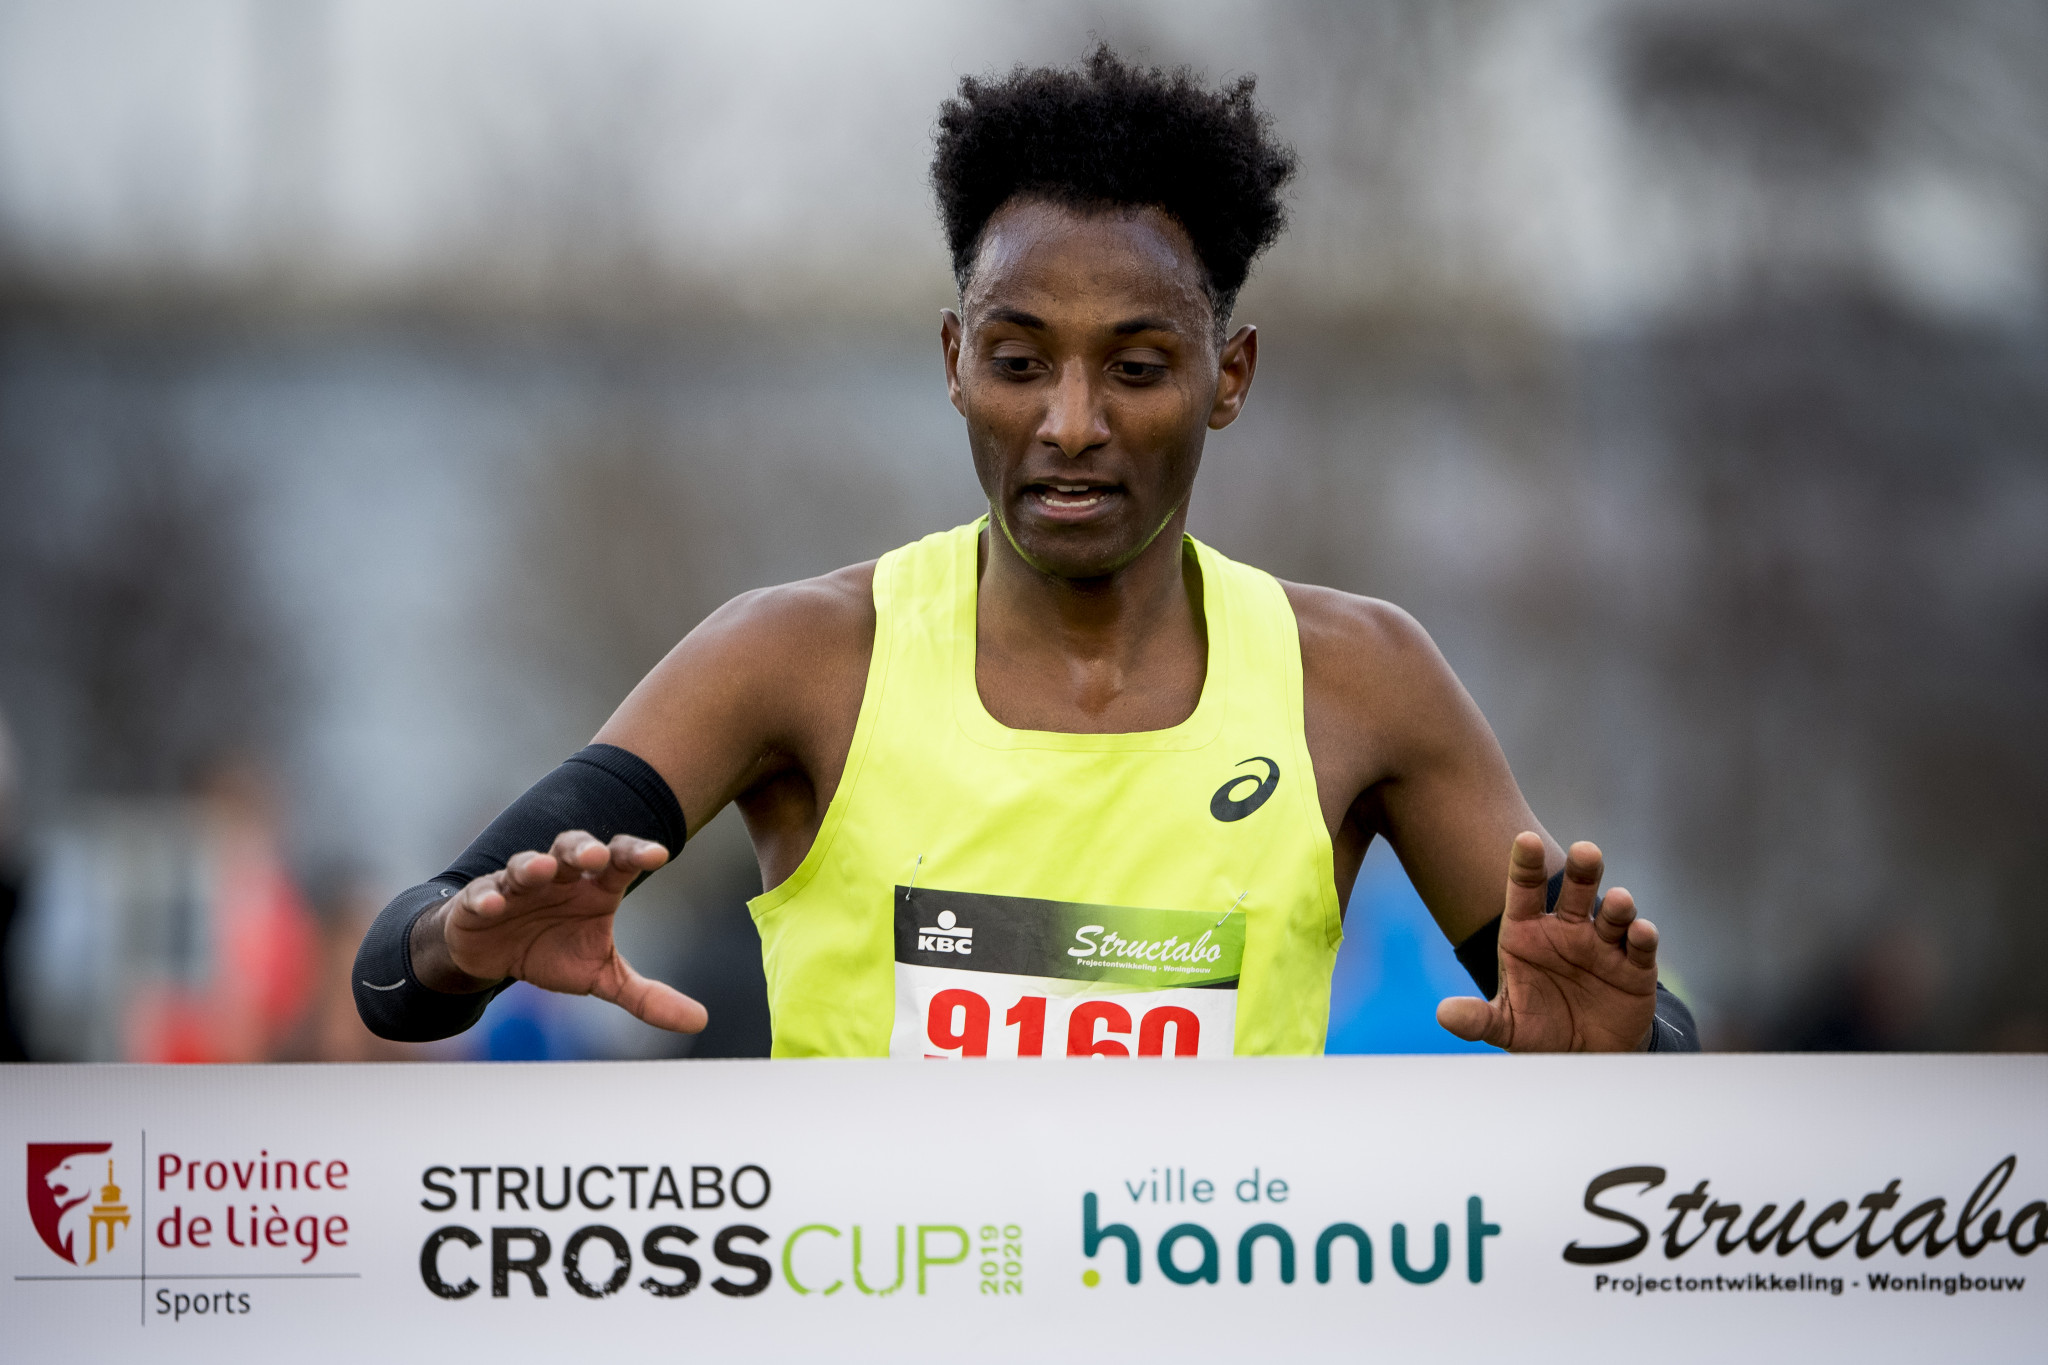 Fitwi and Tropina triumph at World Athletics Cross Country Tour Gold event in Hannut